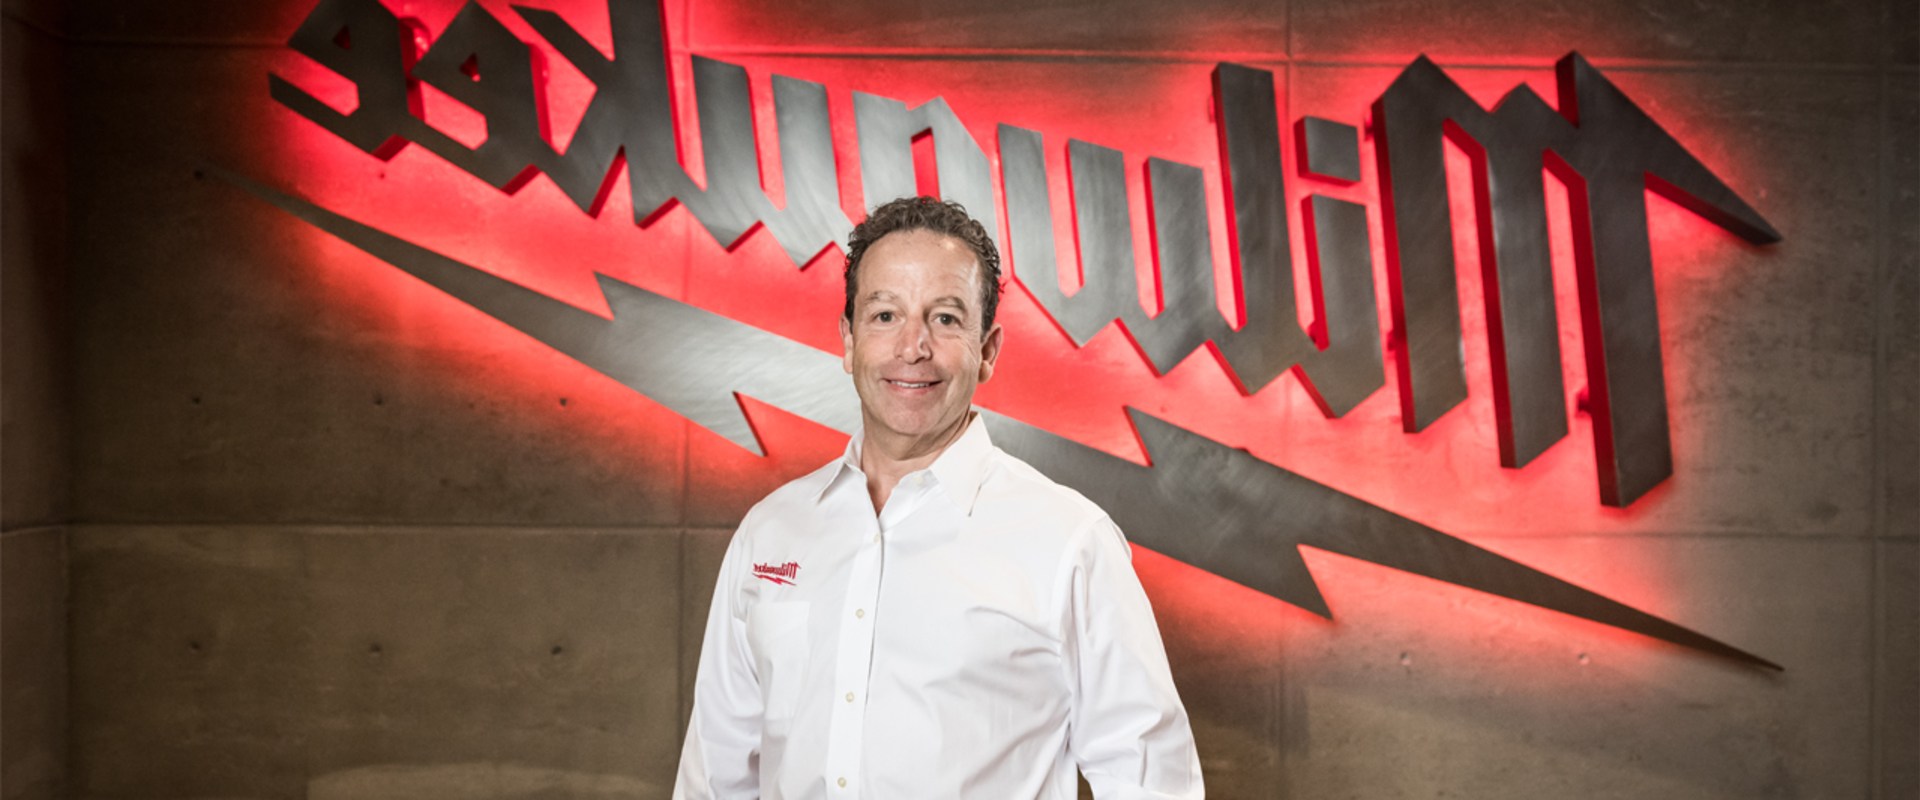 Who is milwaukee tool owned by?